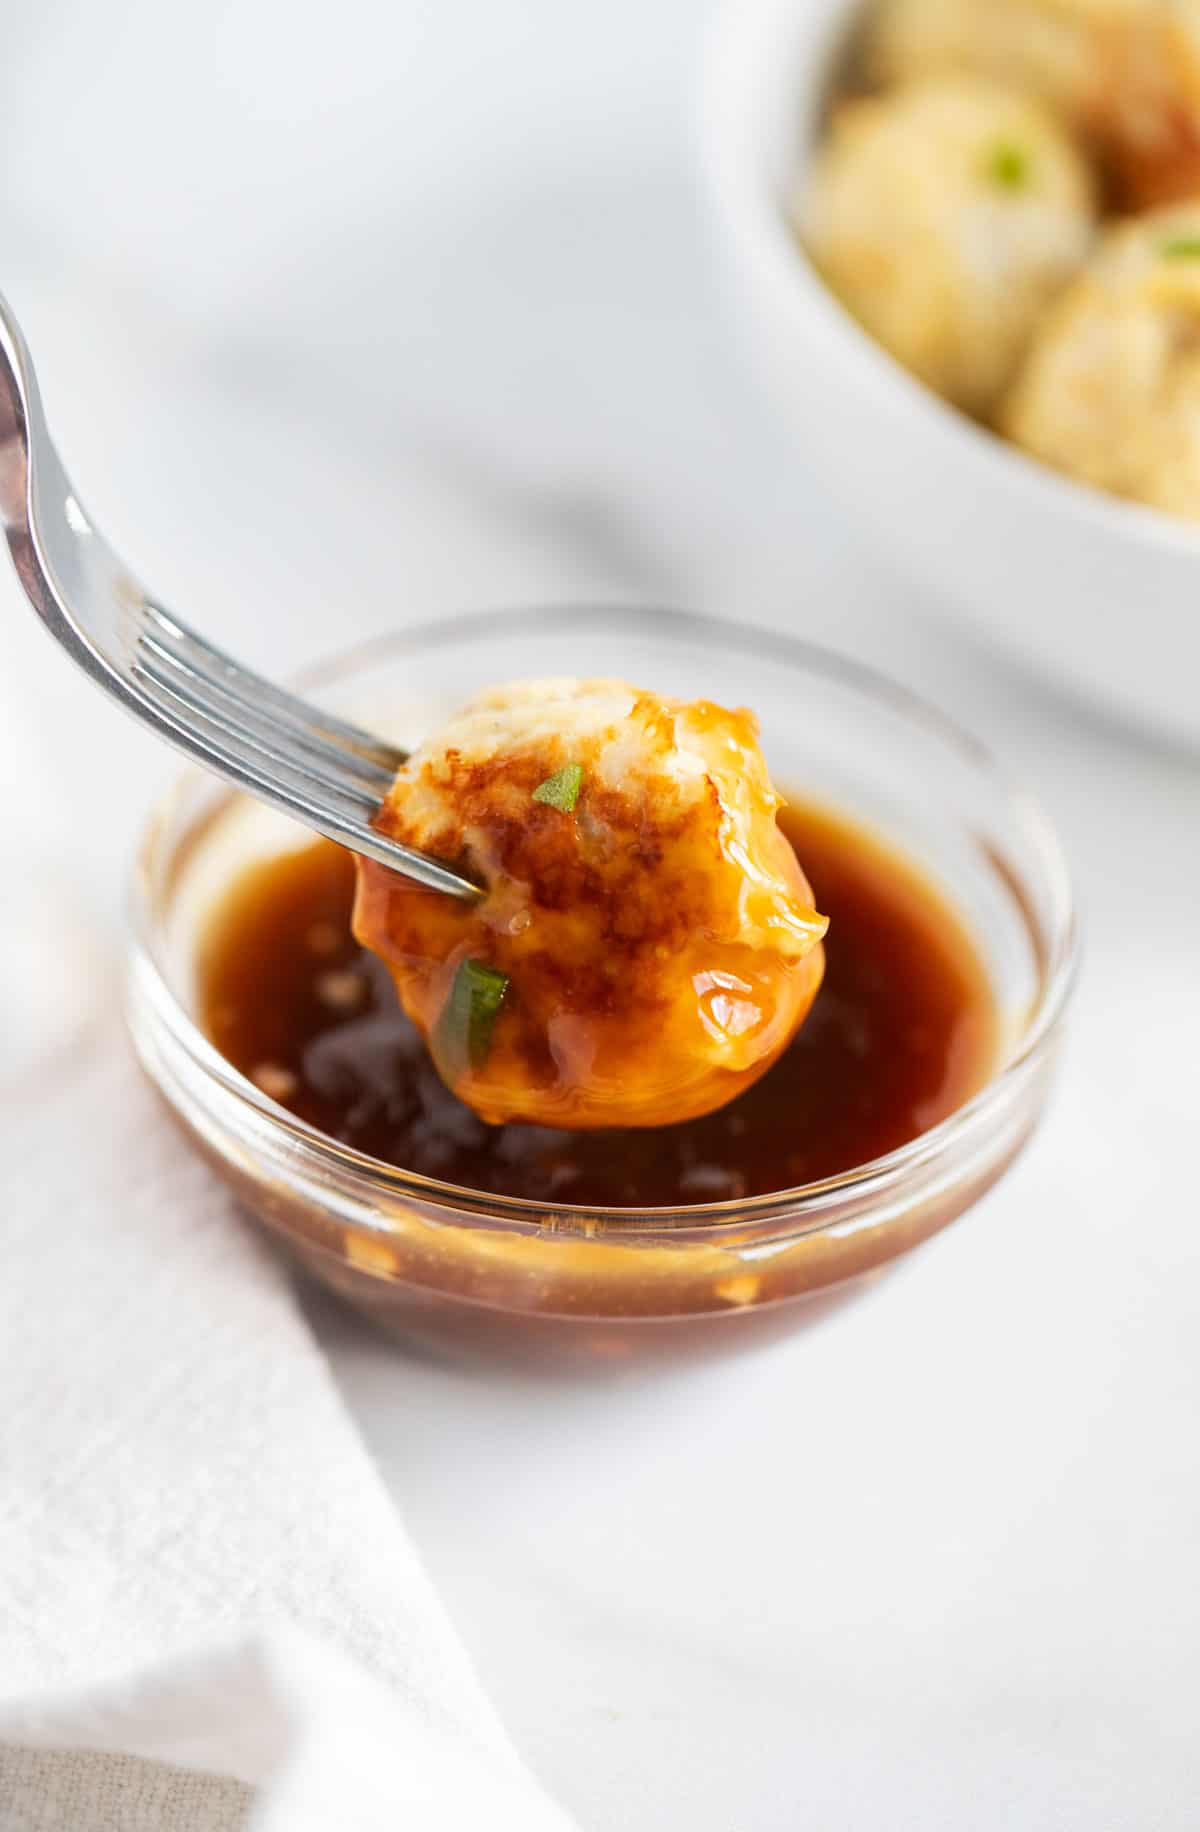 Chicken meatball dipped in sauce.